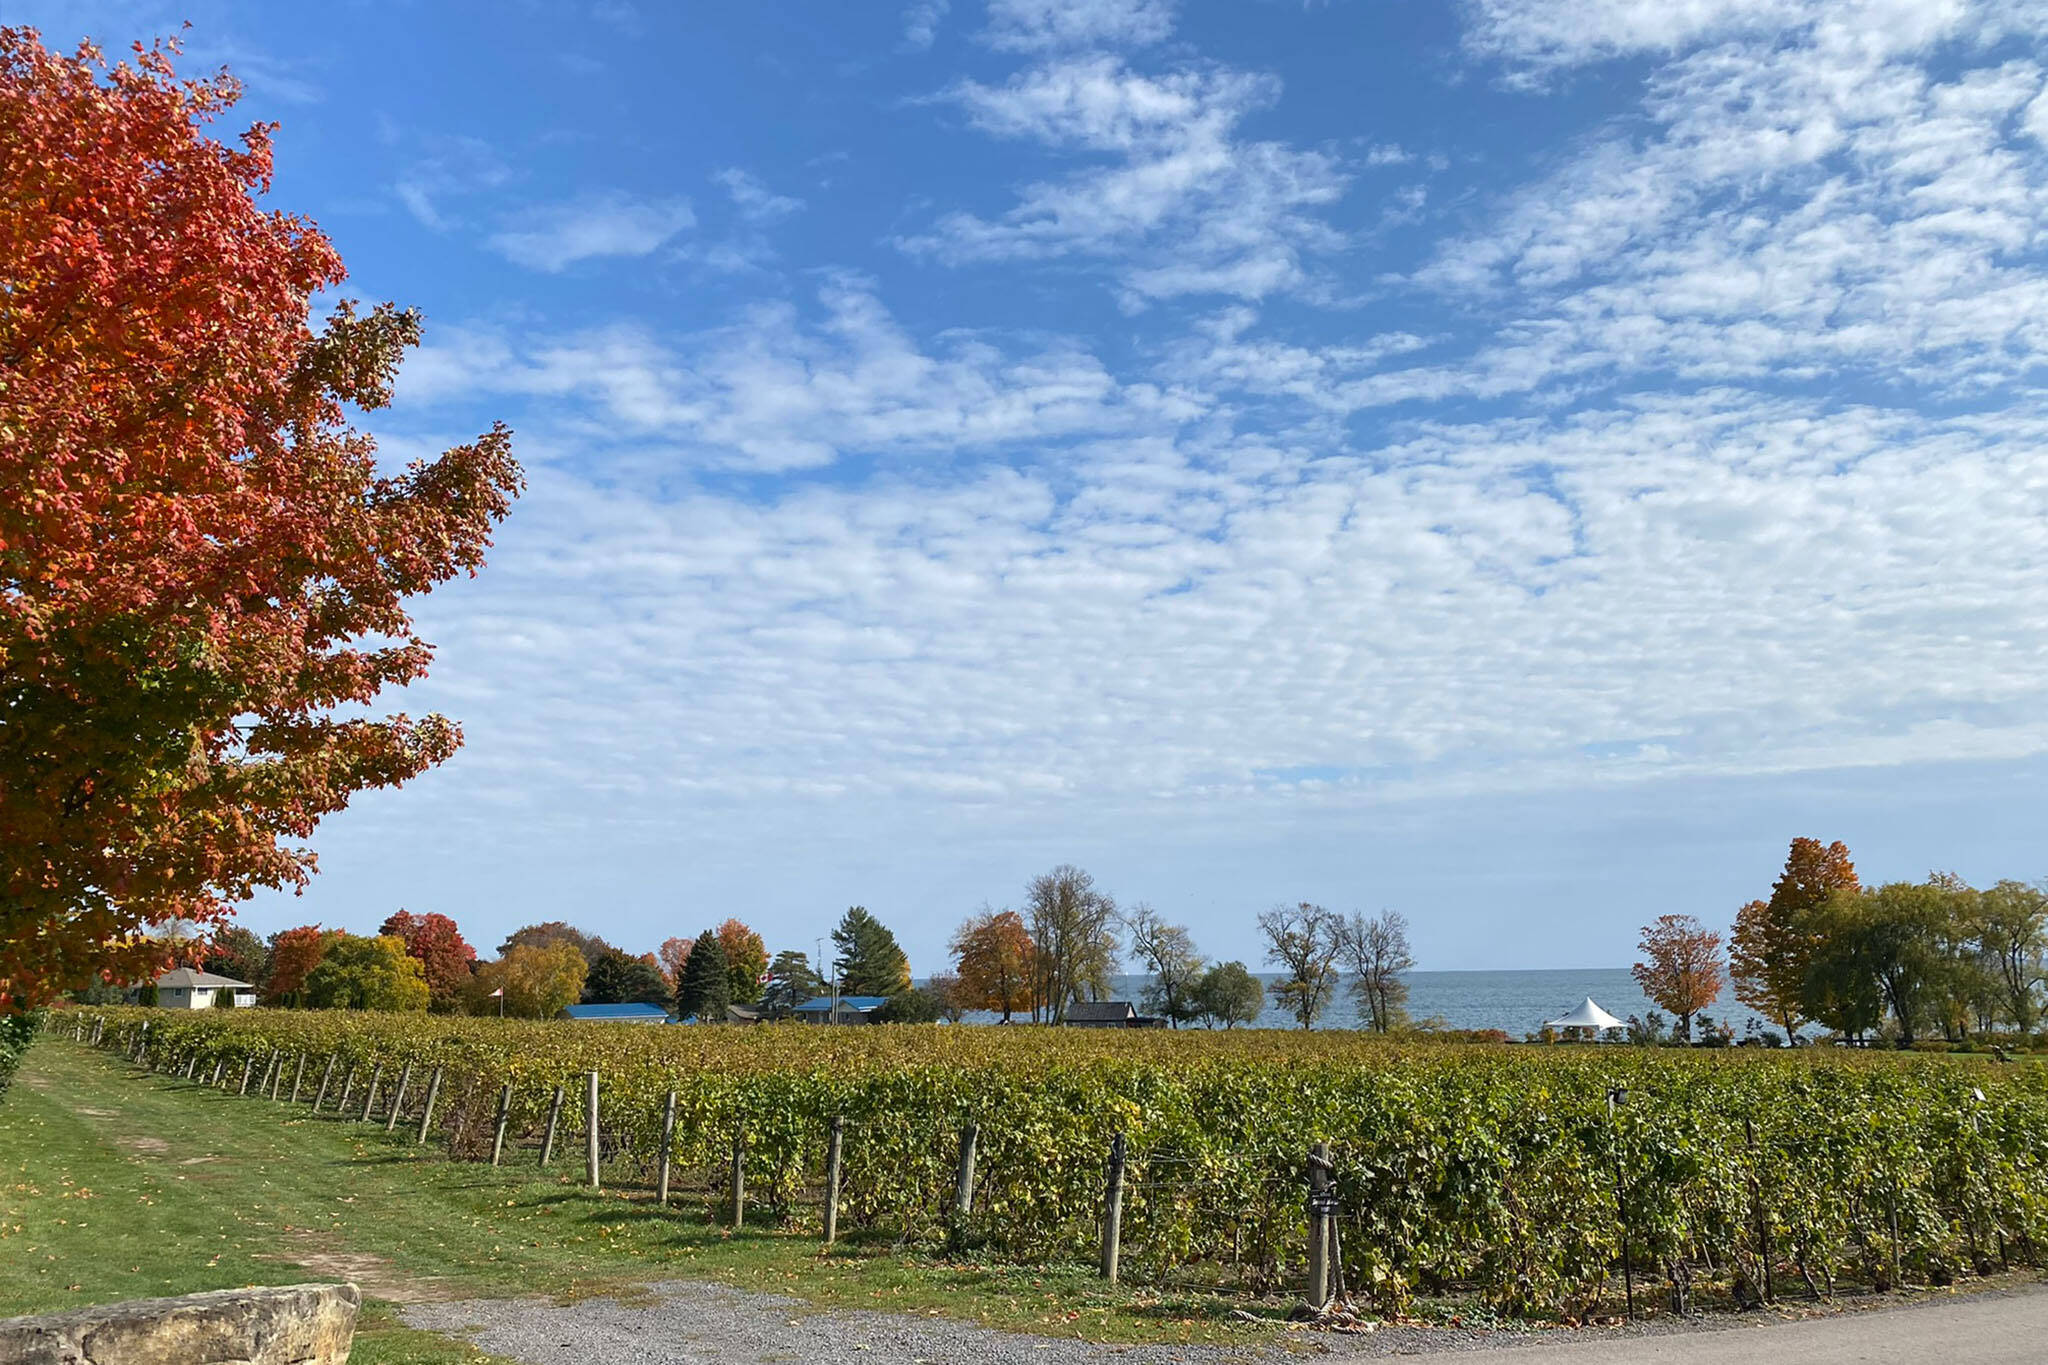 prince edward county wineries